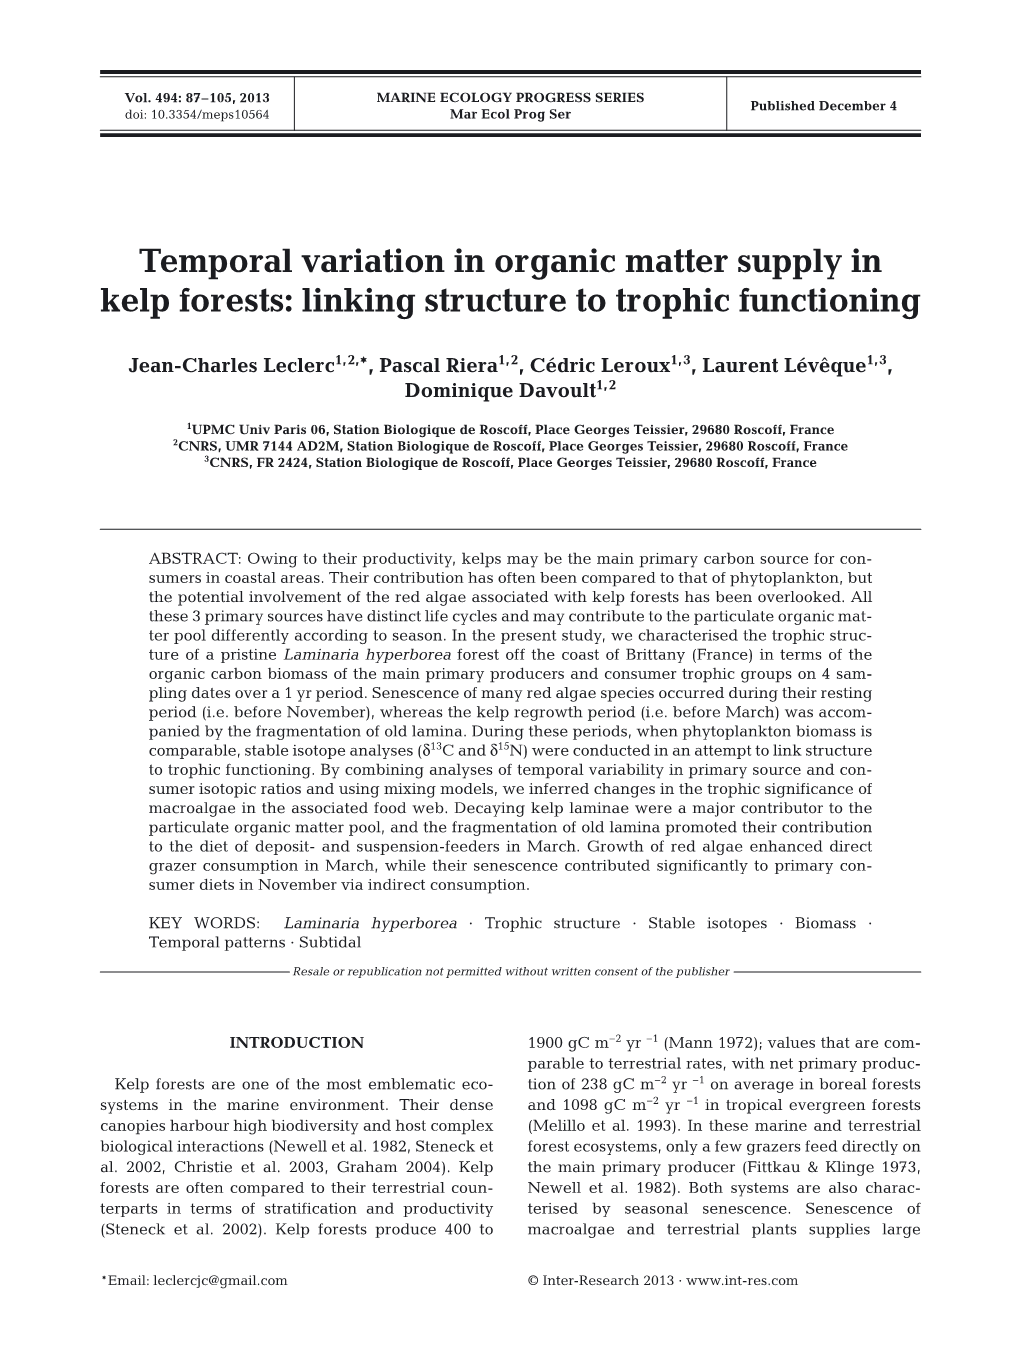 Temporal Variation in Organic Matter Supply in Kelp Forests: Linking Structure to Trophic Functioning